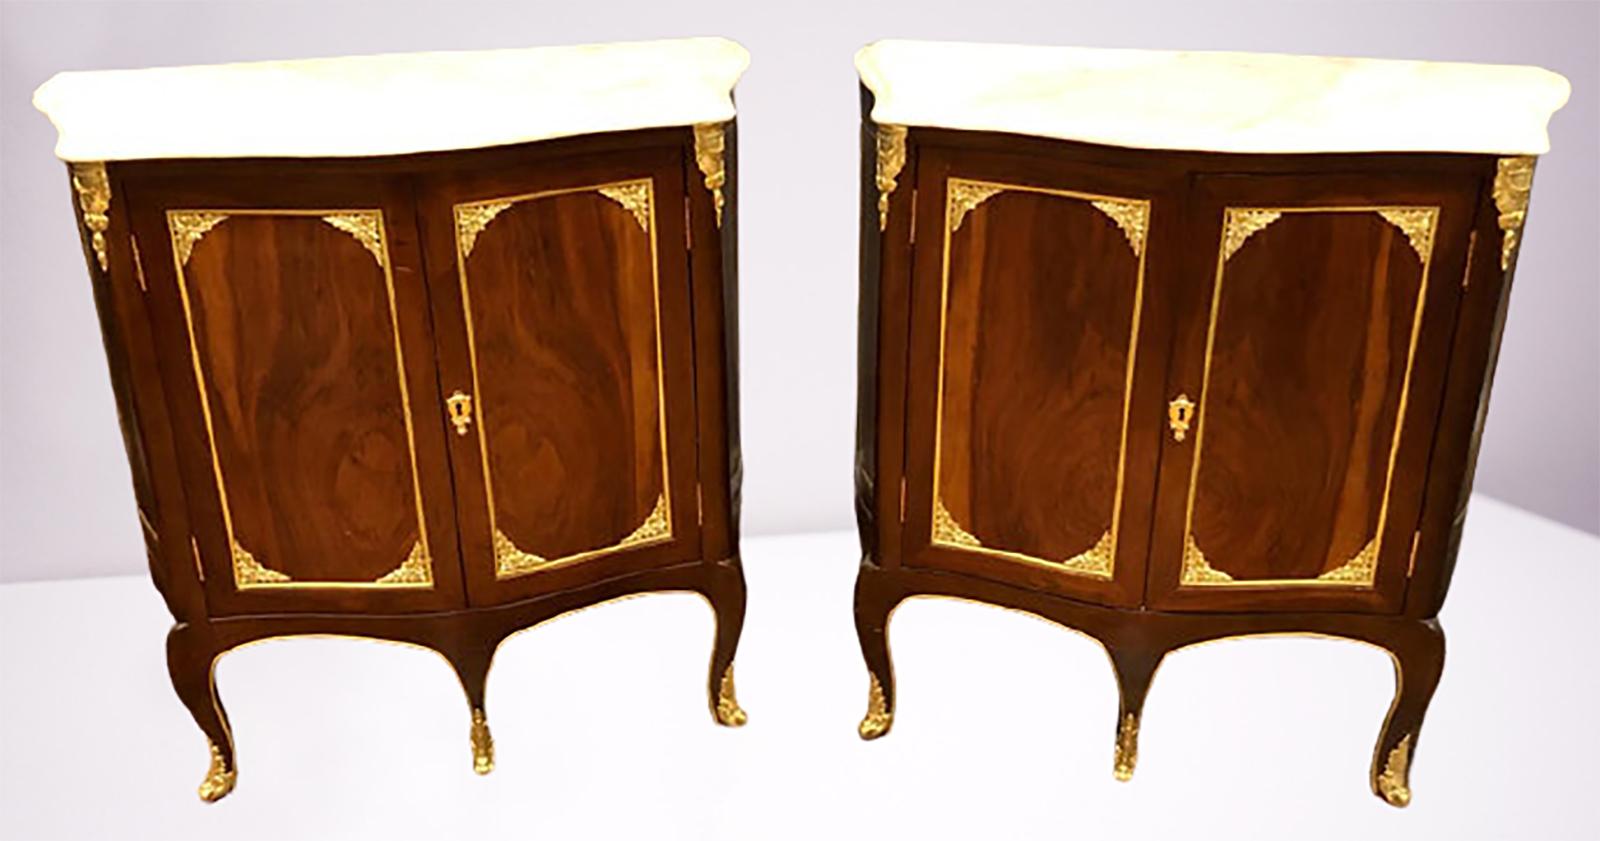 Pair of Louis XV Style cabinets commodes or nightstands. The pair having oak shelved interiors with full locks. The fronts a Fine mahogany finish with full bronze mounts throughout. Each supporting a white marble top.